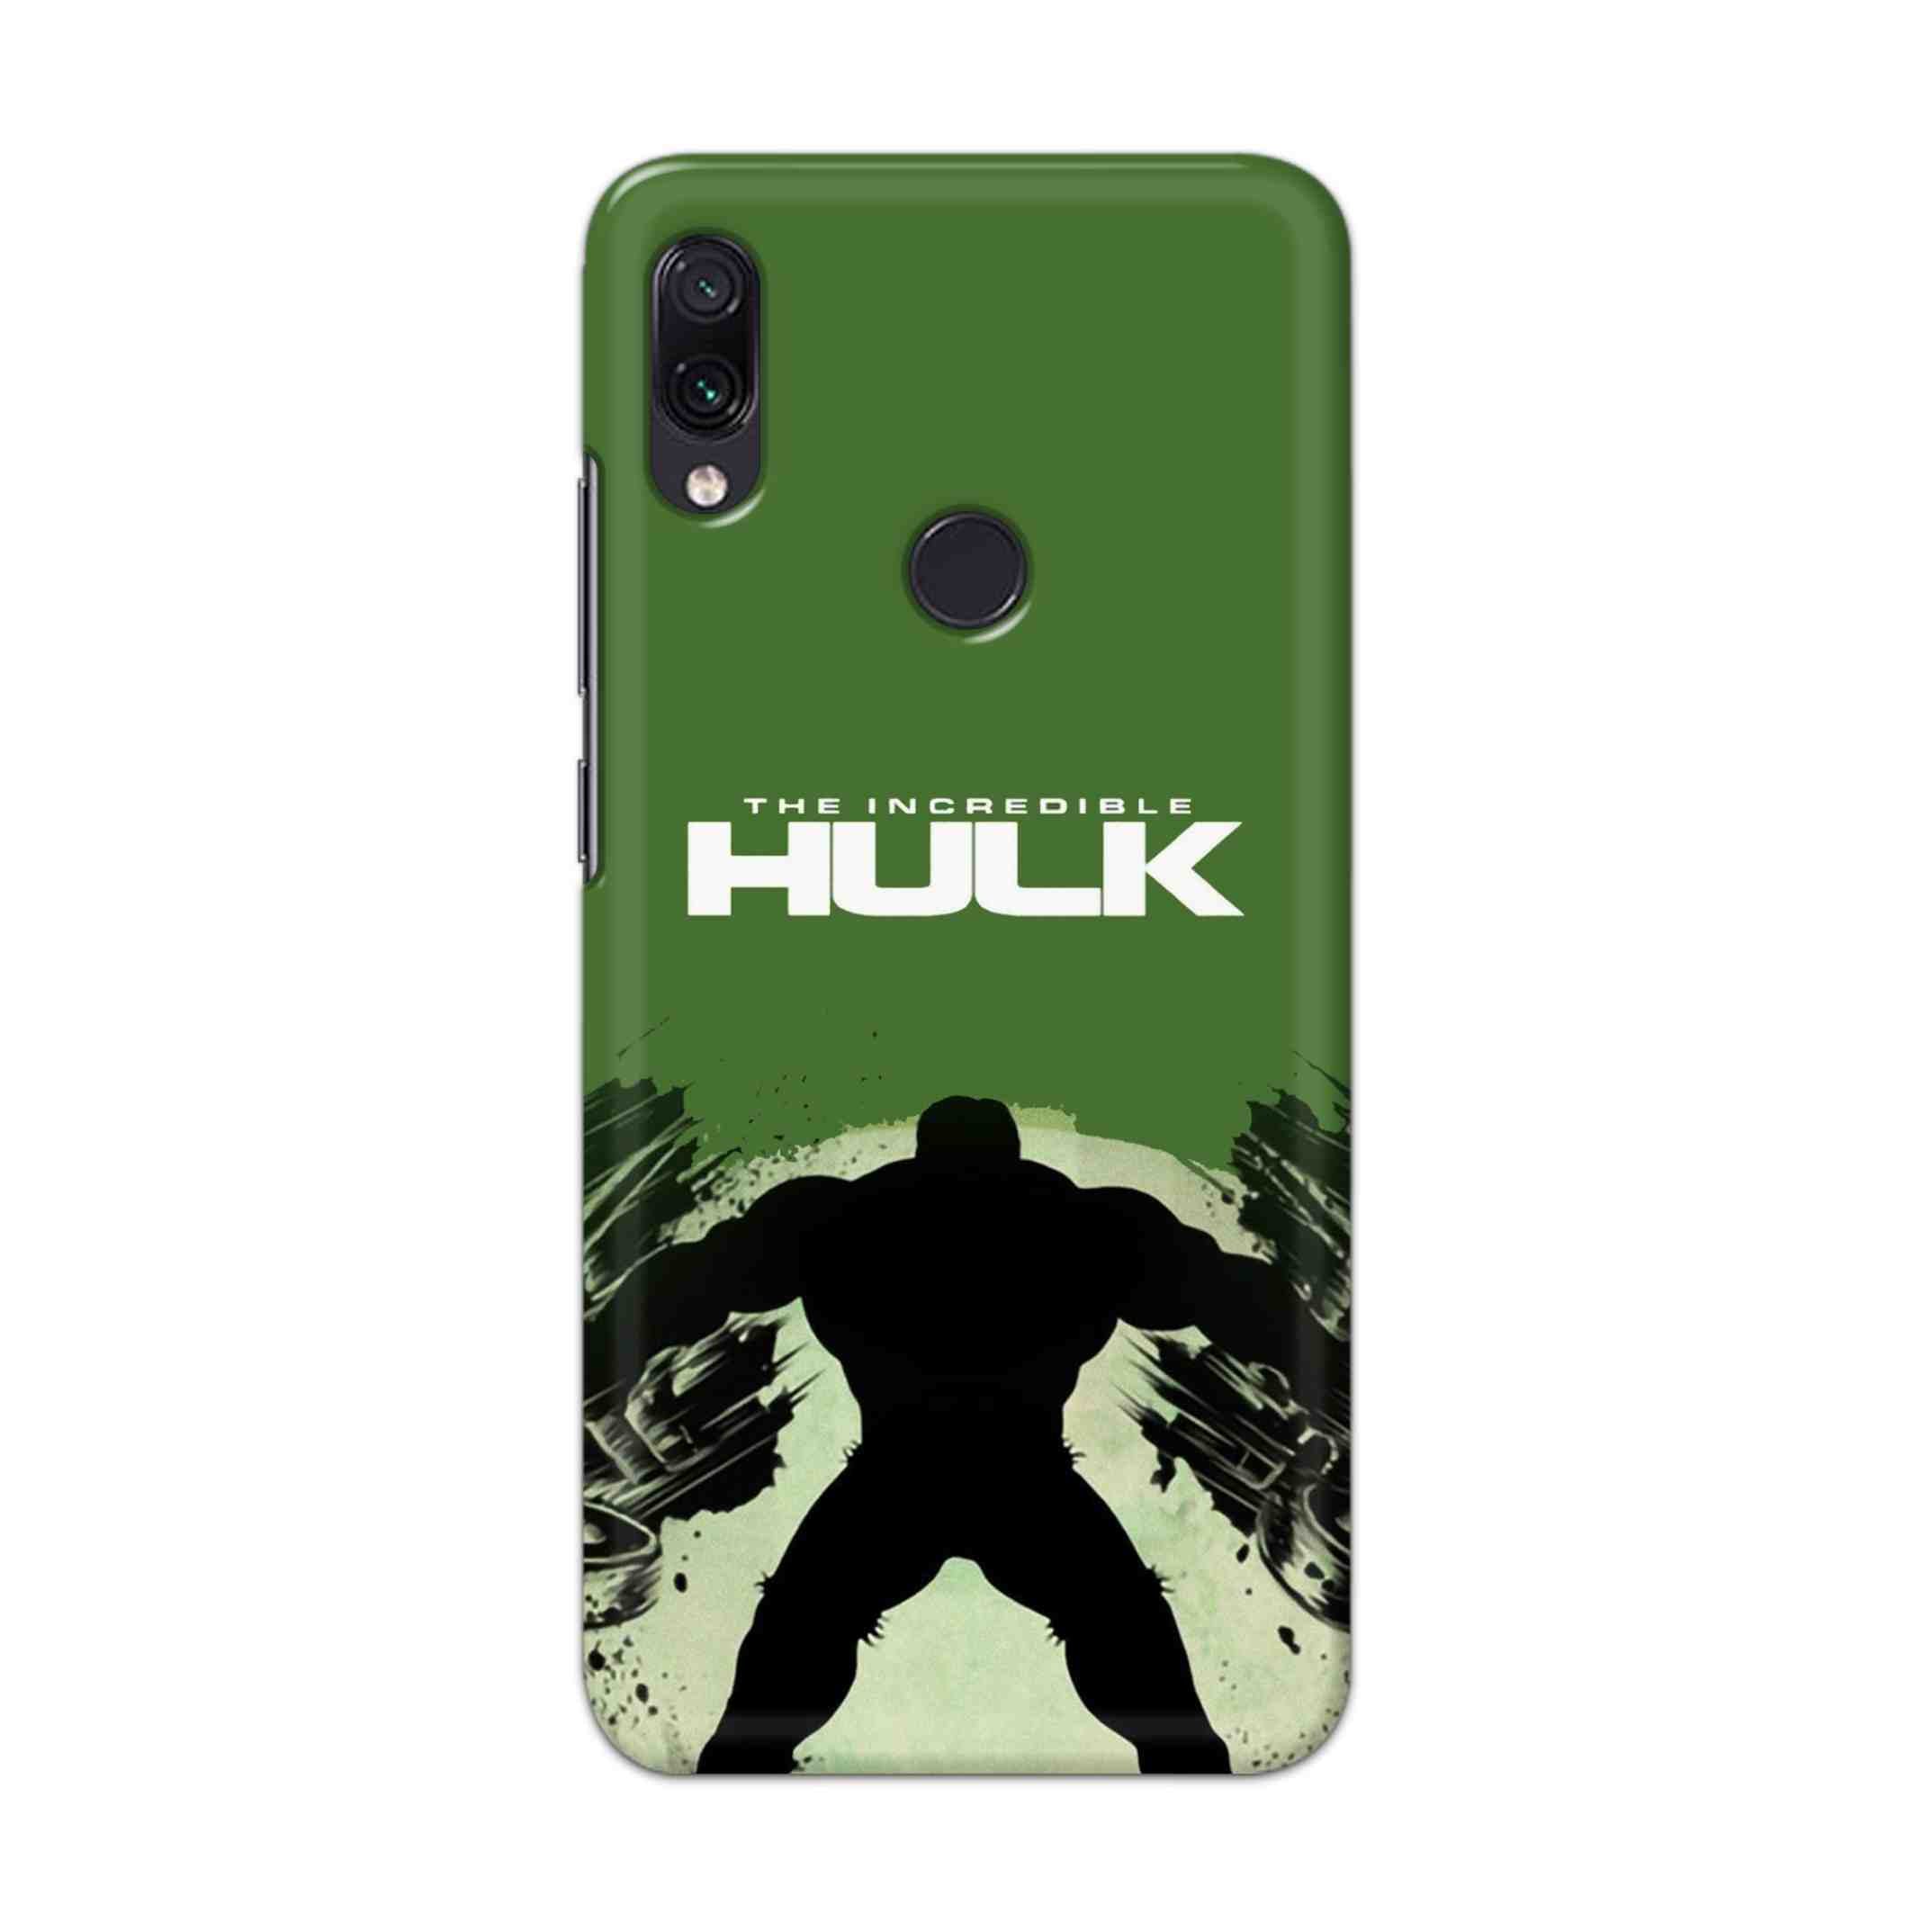 Buy Hulk Hard Back Mobile Phone Case Cover For Redmi Note 7 / Note 7 Pro Online